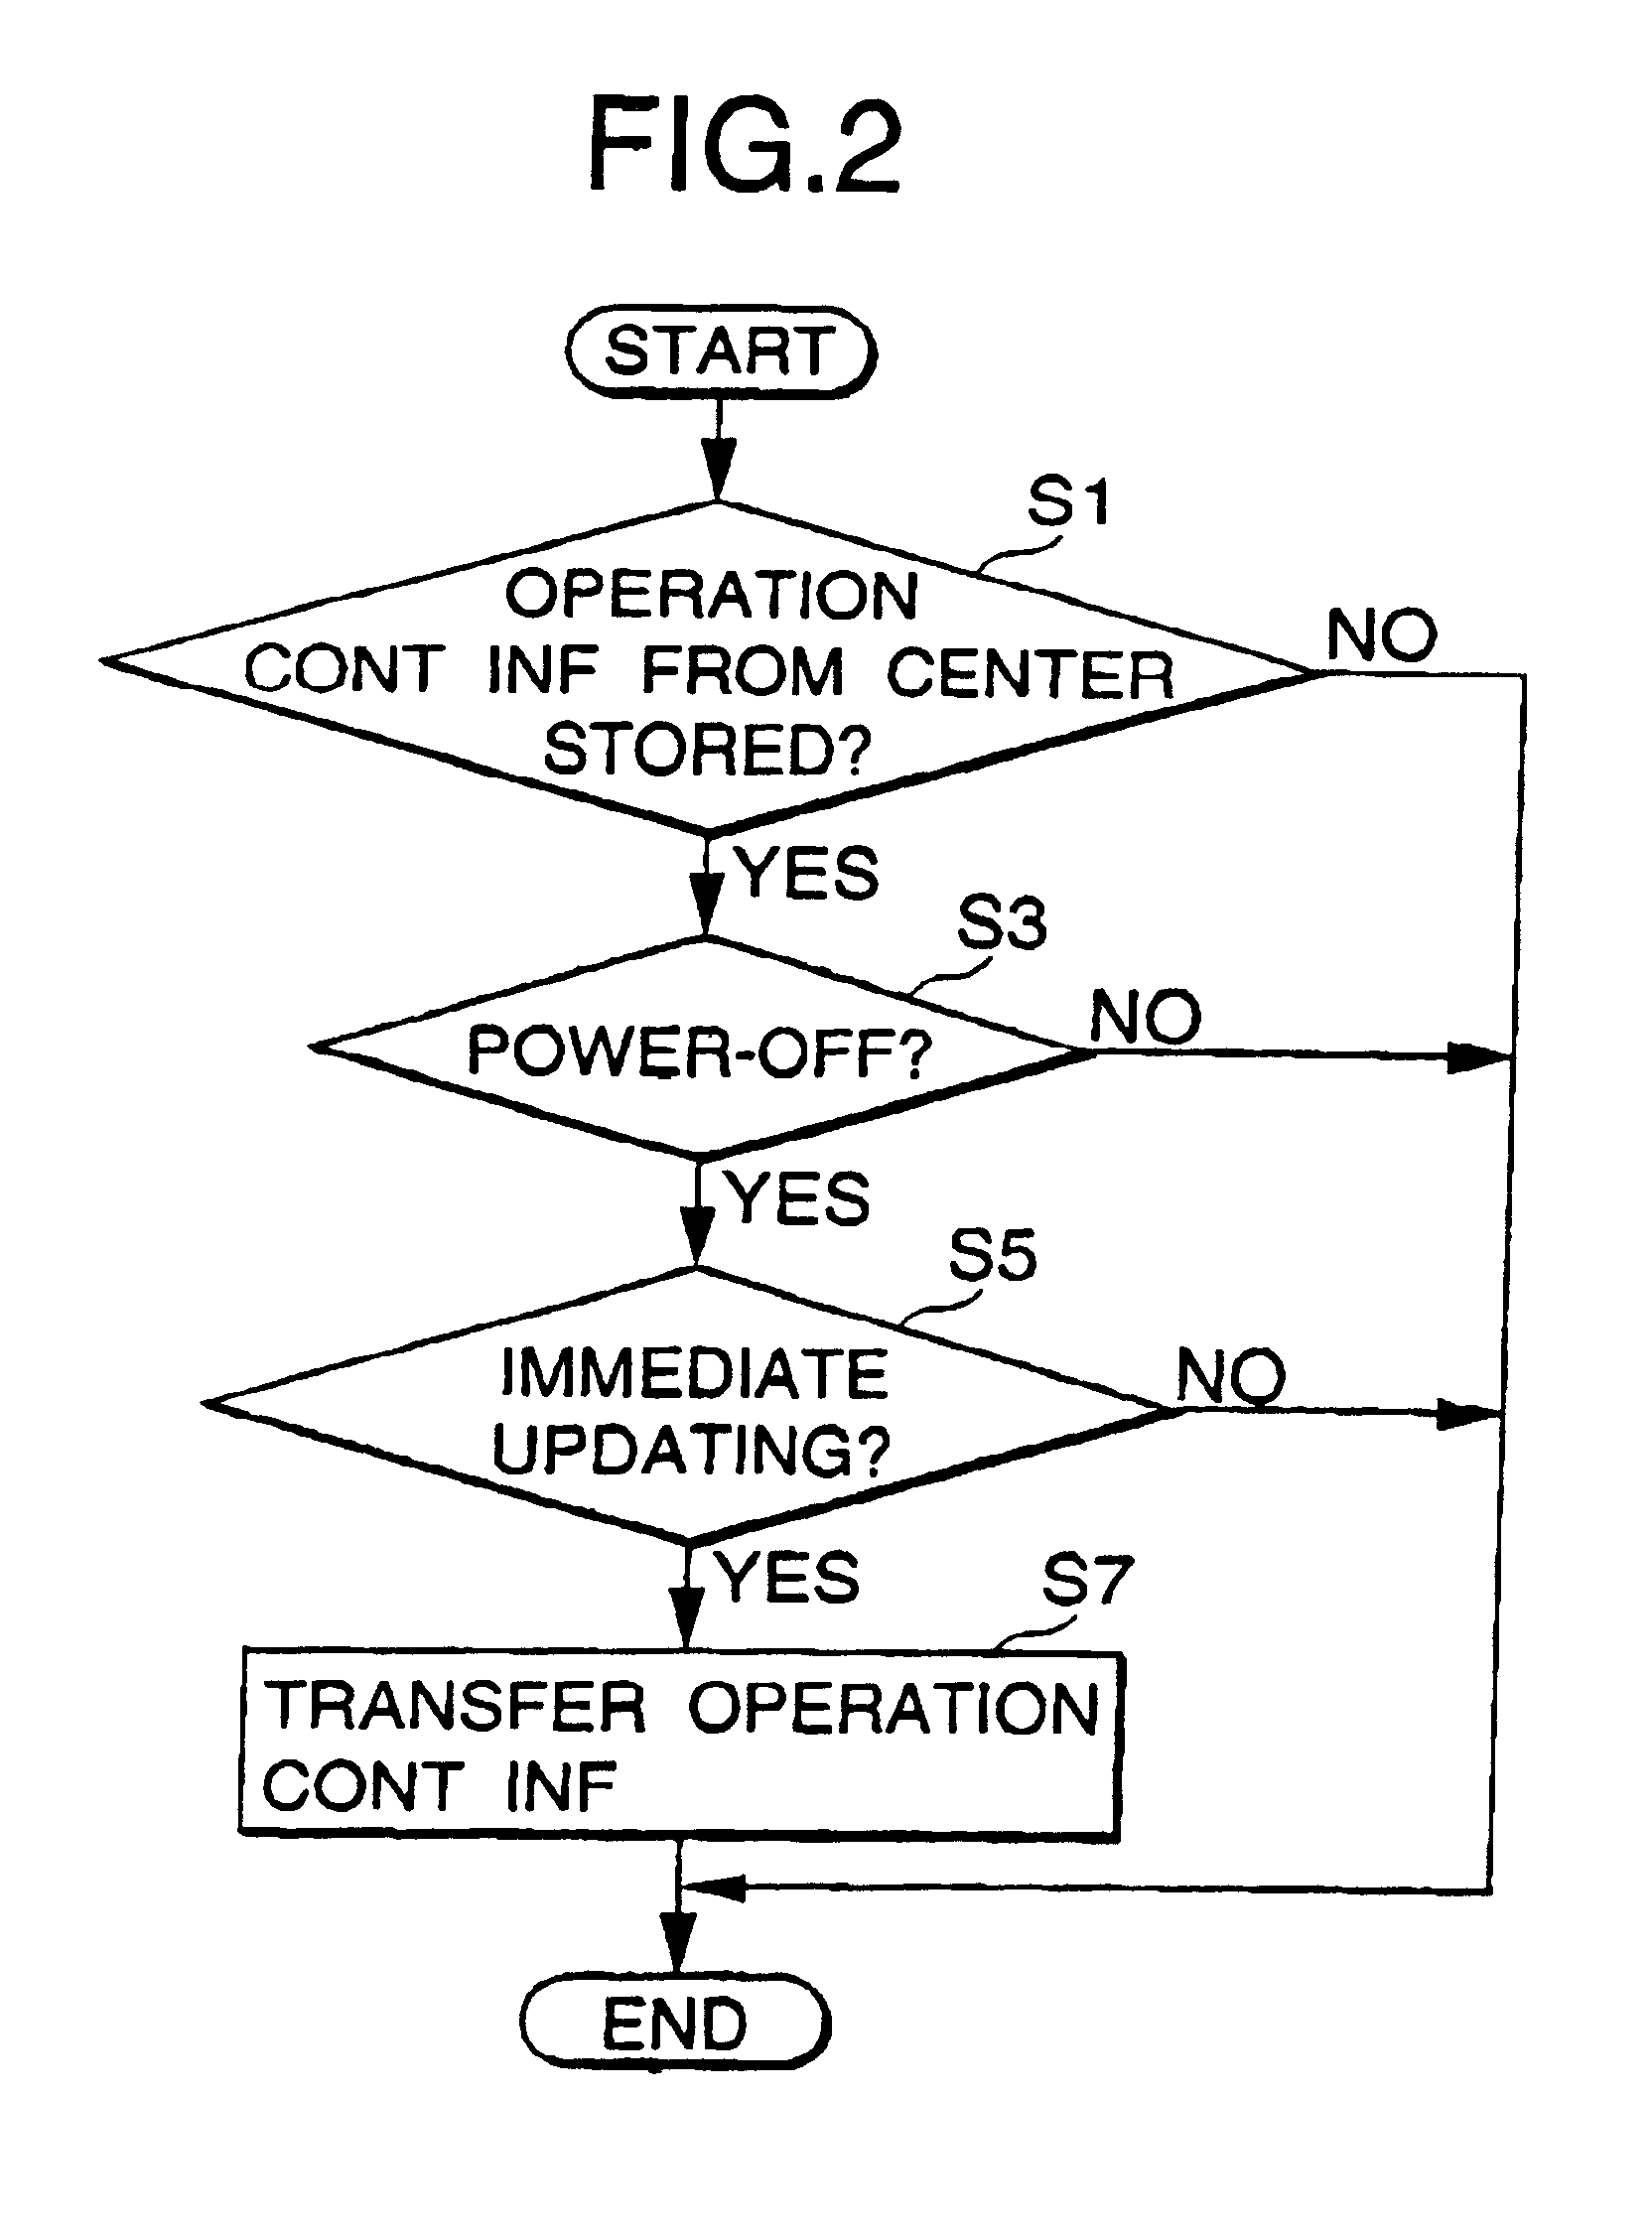 Processing apparatus and an operation control information update system employing the processing apparatus